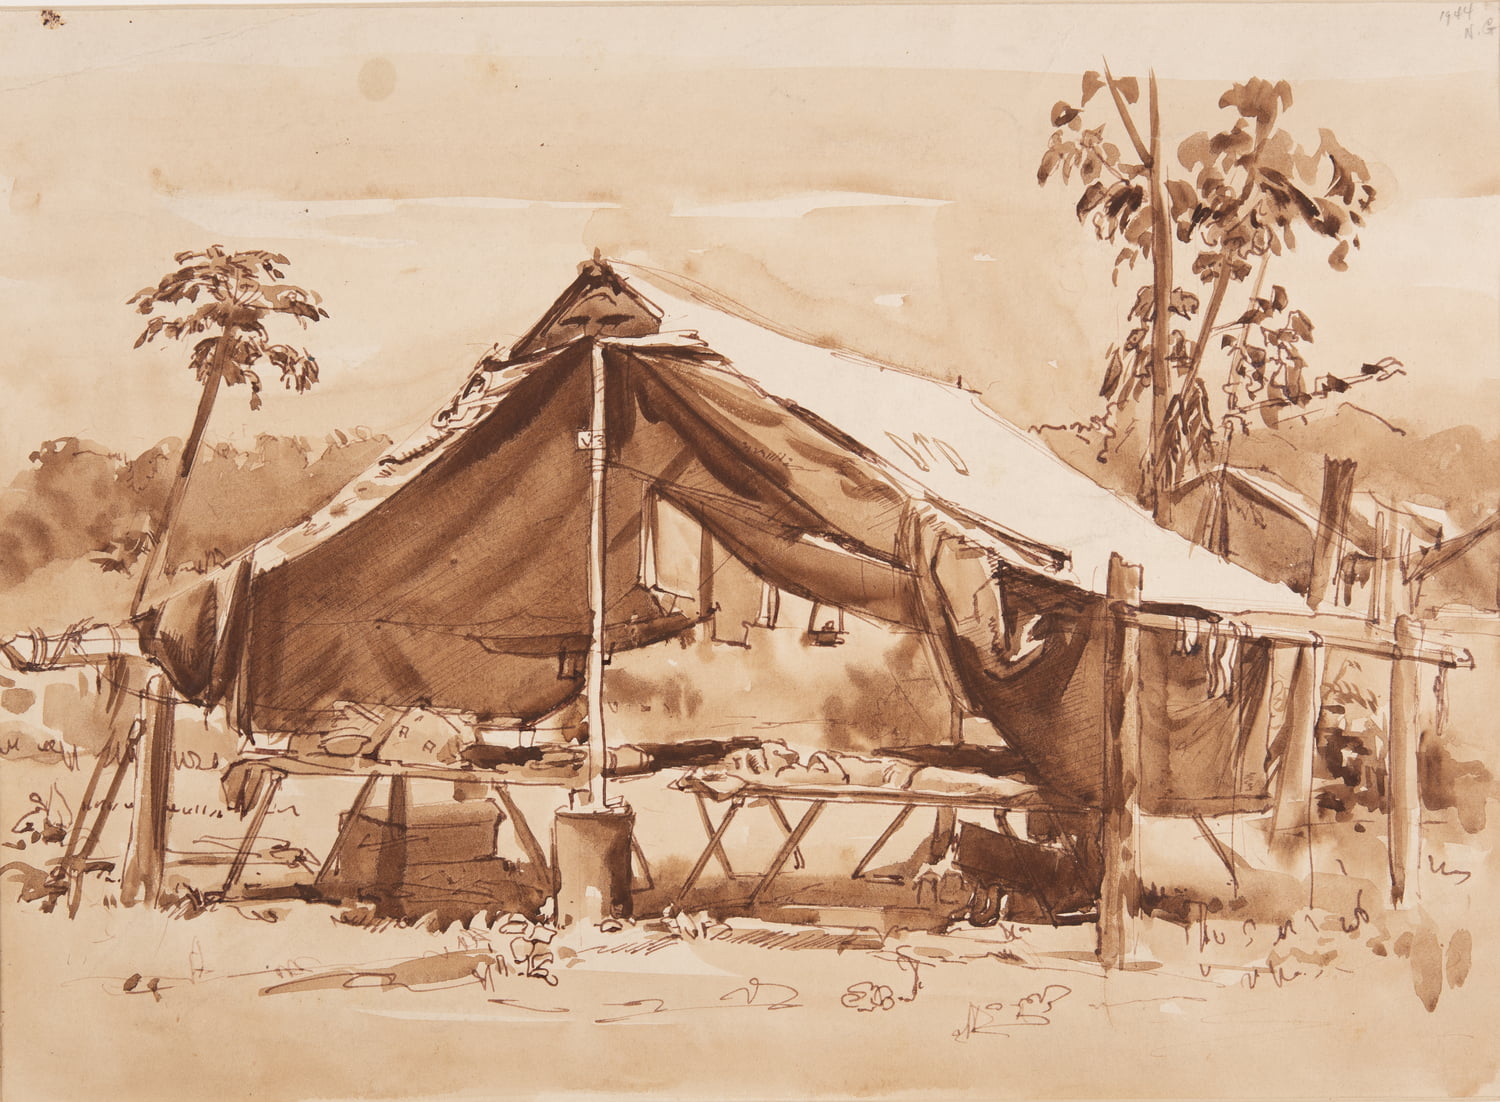 Soldiers Tent, New Guinea